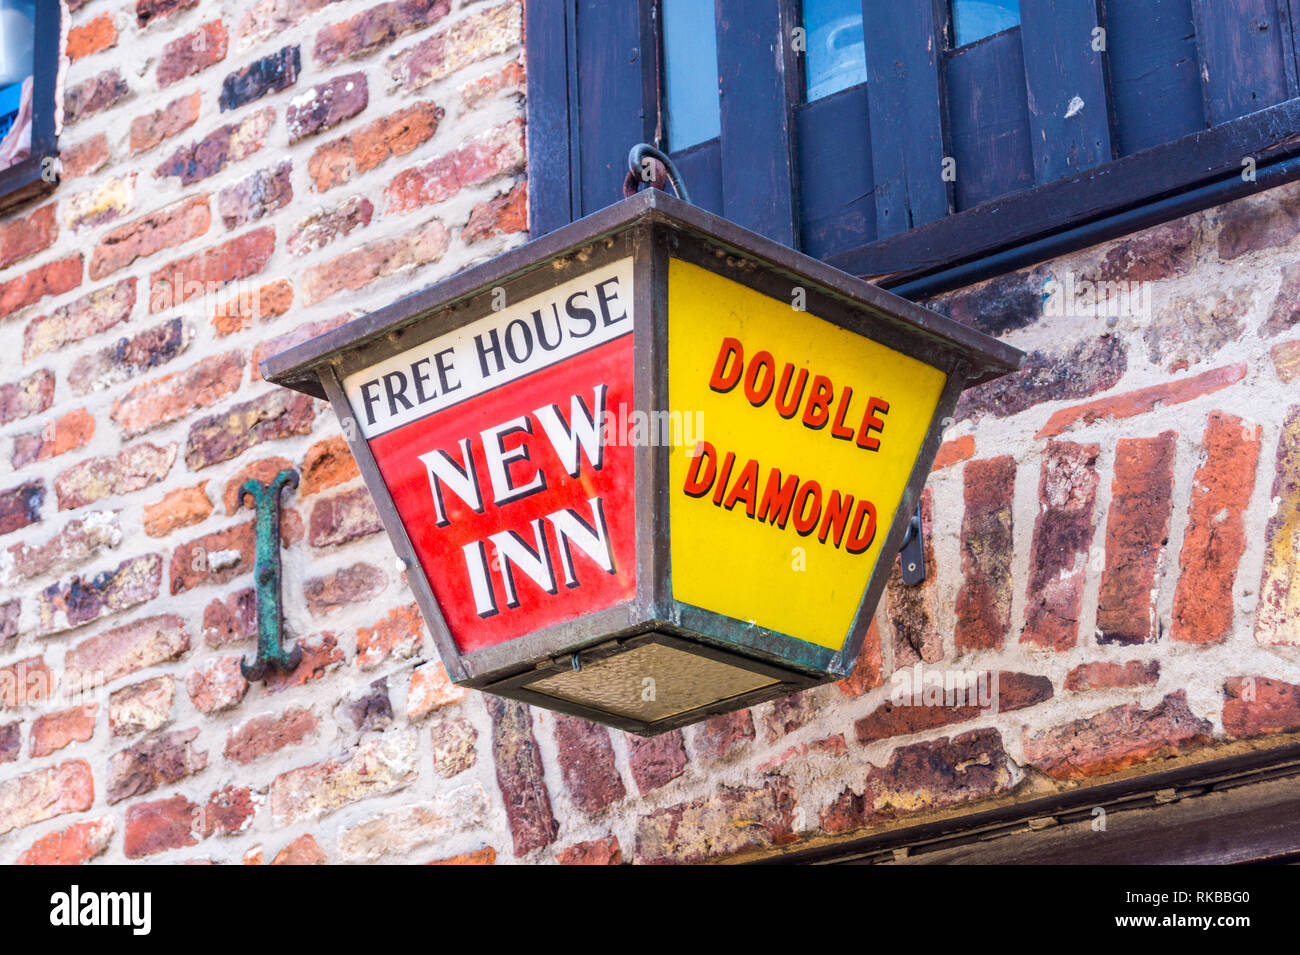 Hanging lantern sign outside Chequers micropub,Beverley, East Riding, Yorkshire, England Stock Photo